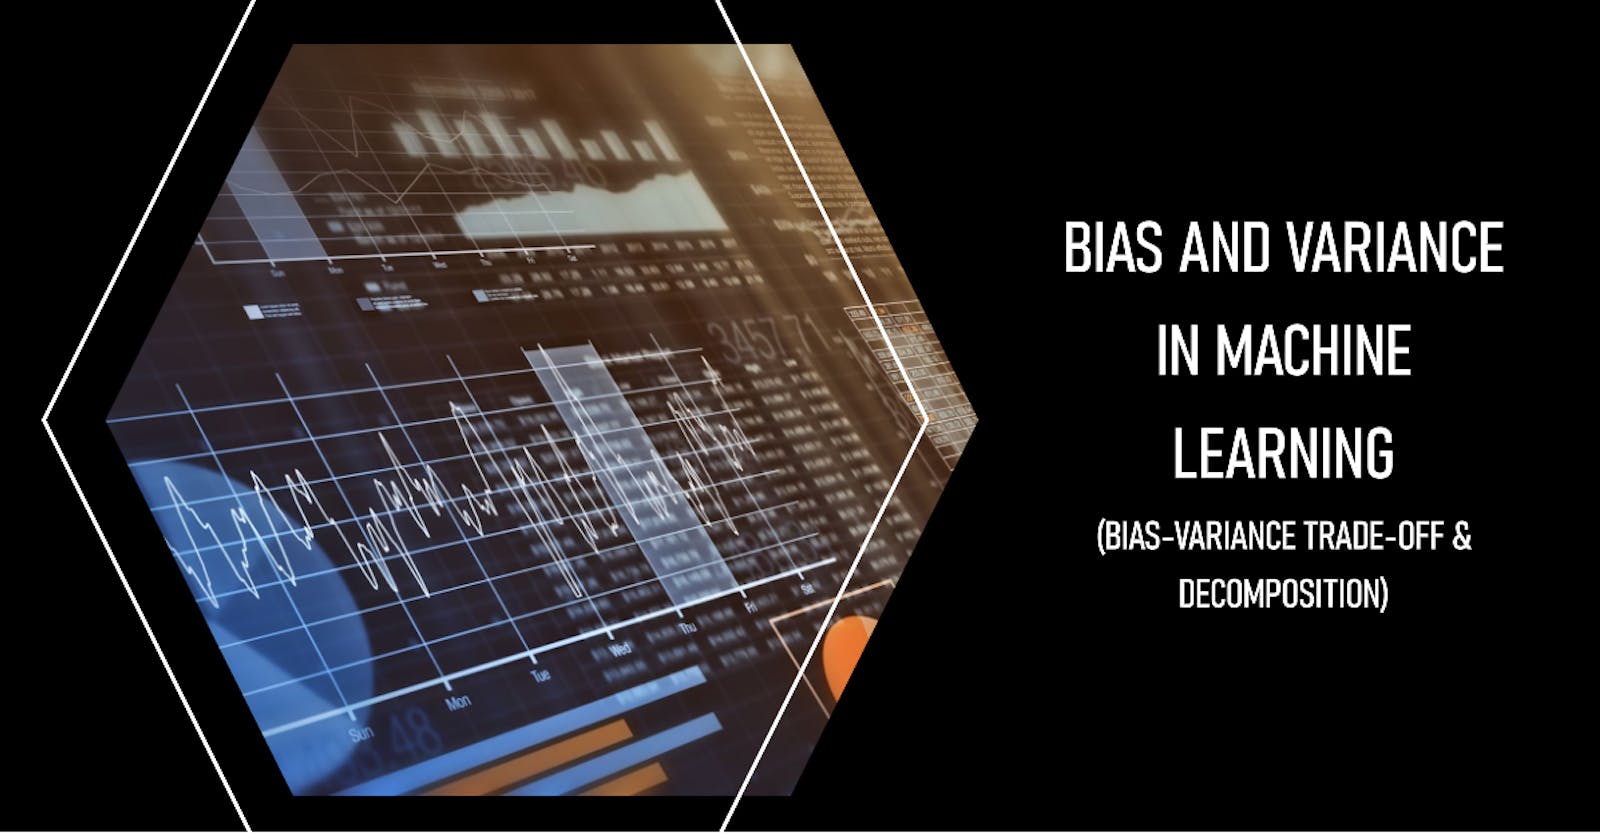 Bias and Variance in Machine Learning